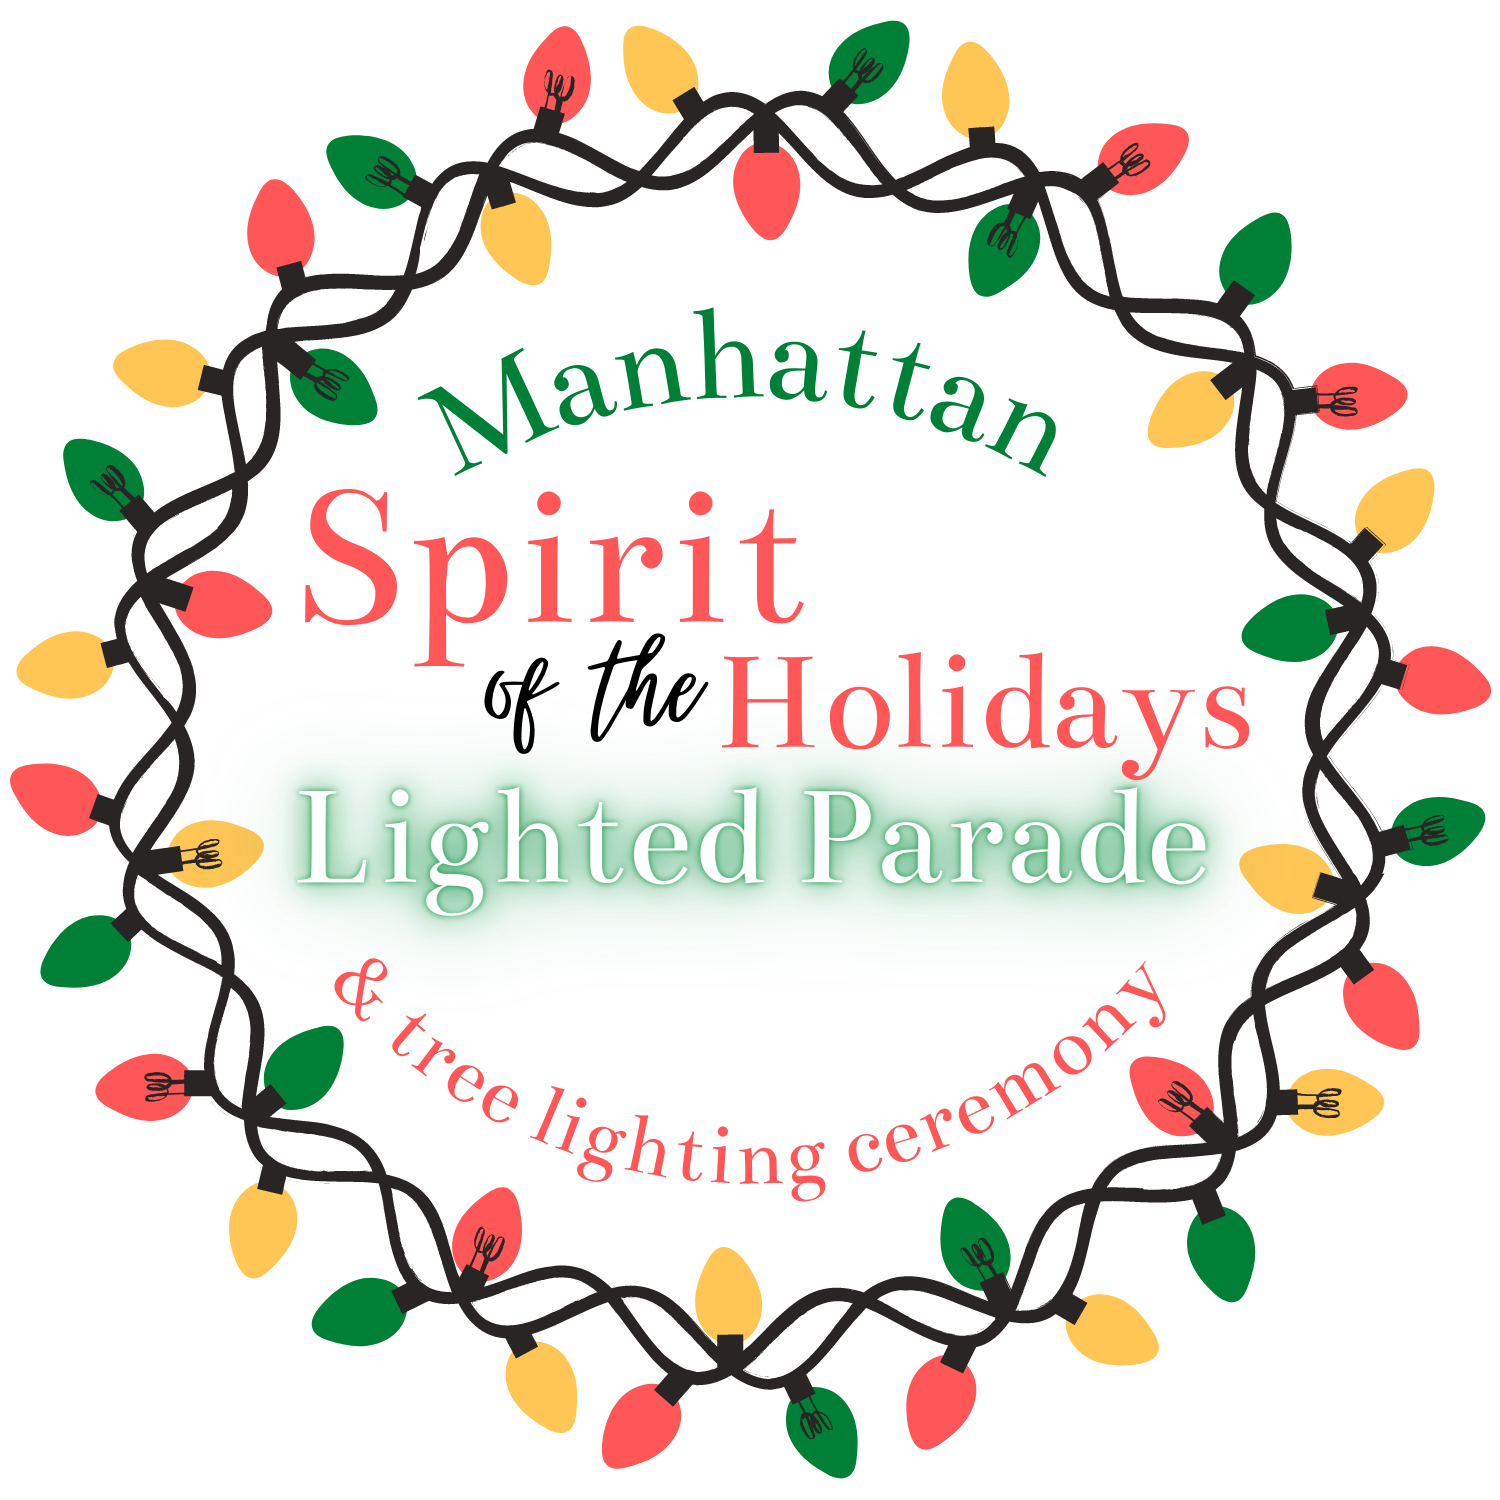 Holidays get in full swing with Spirit of the Holidays Lighted Parade